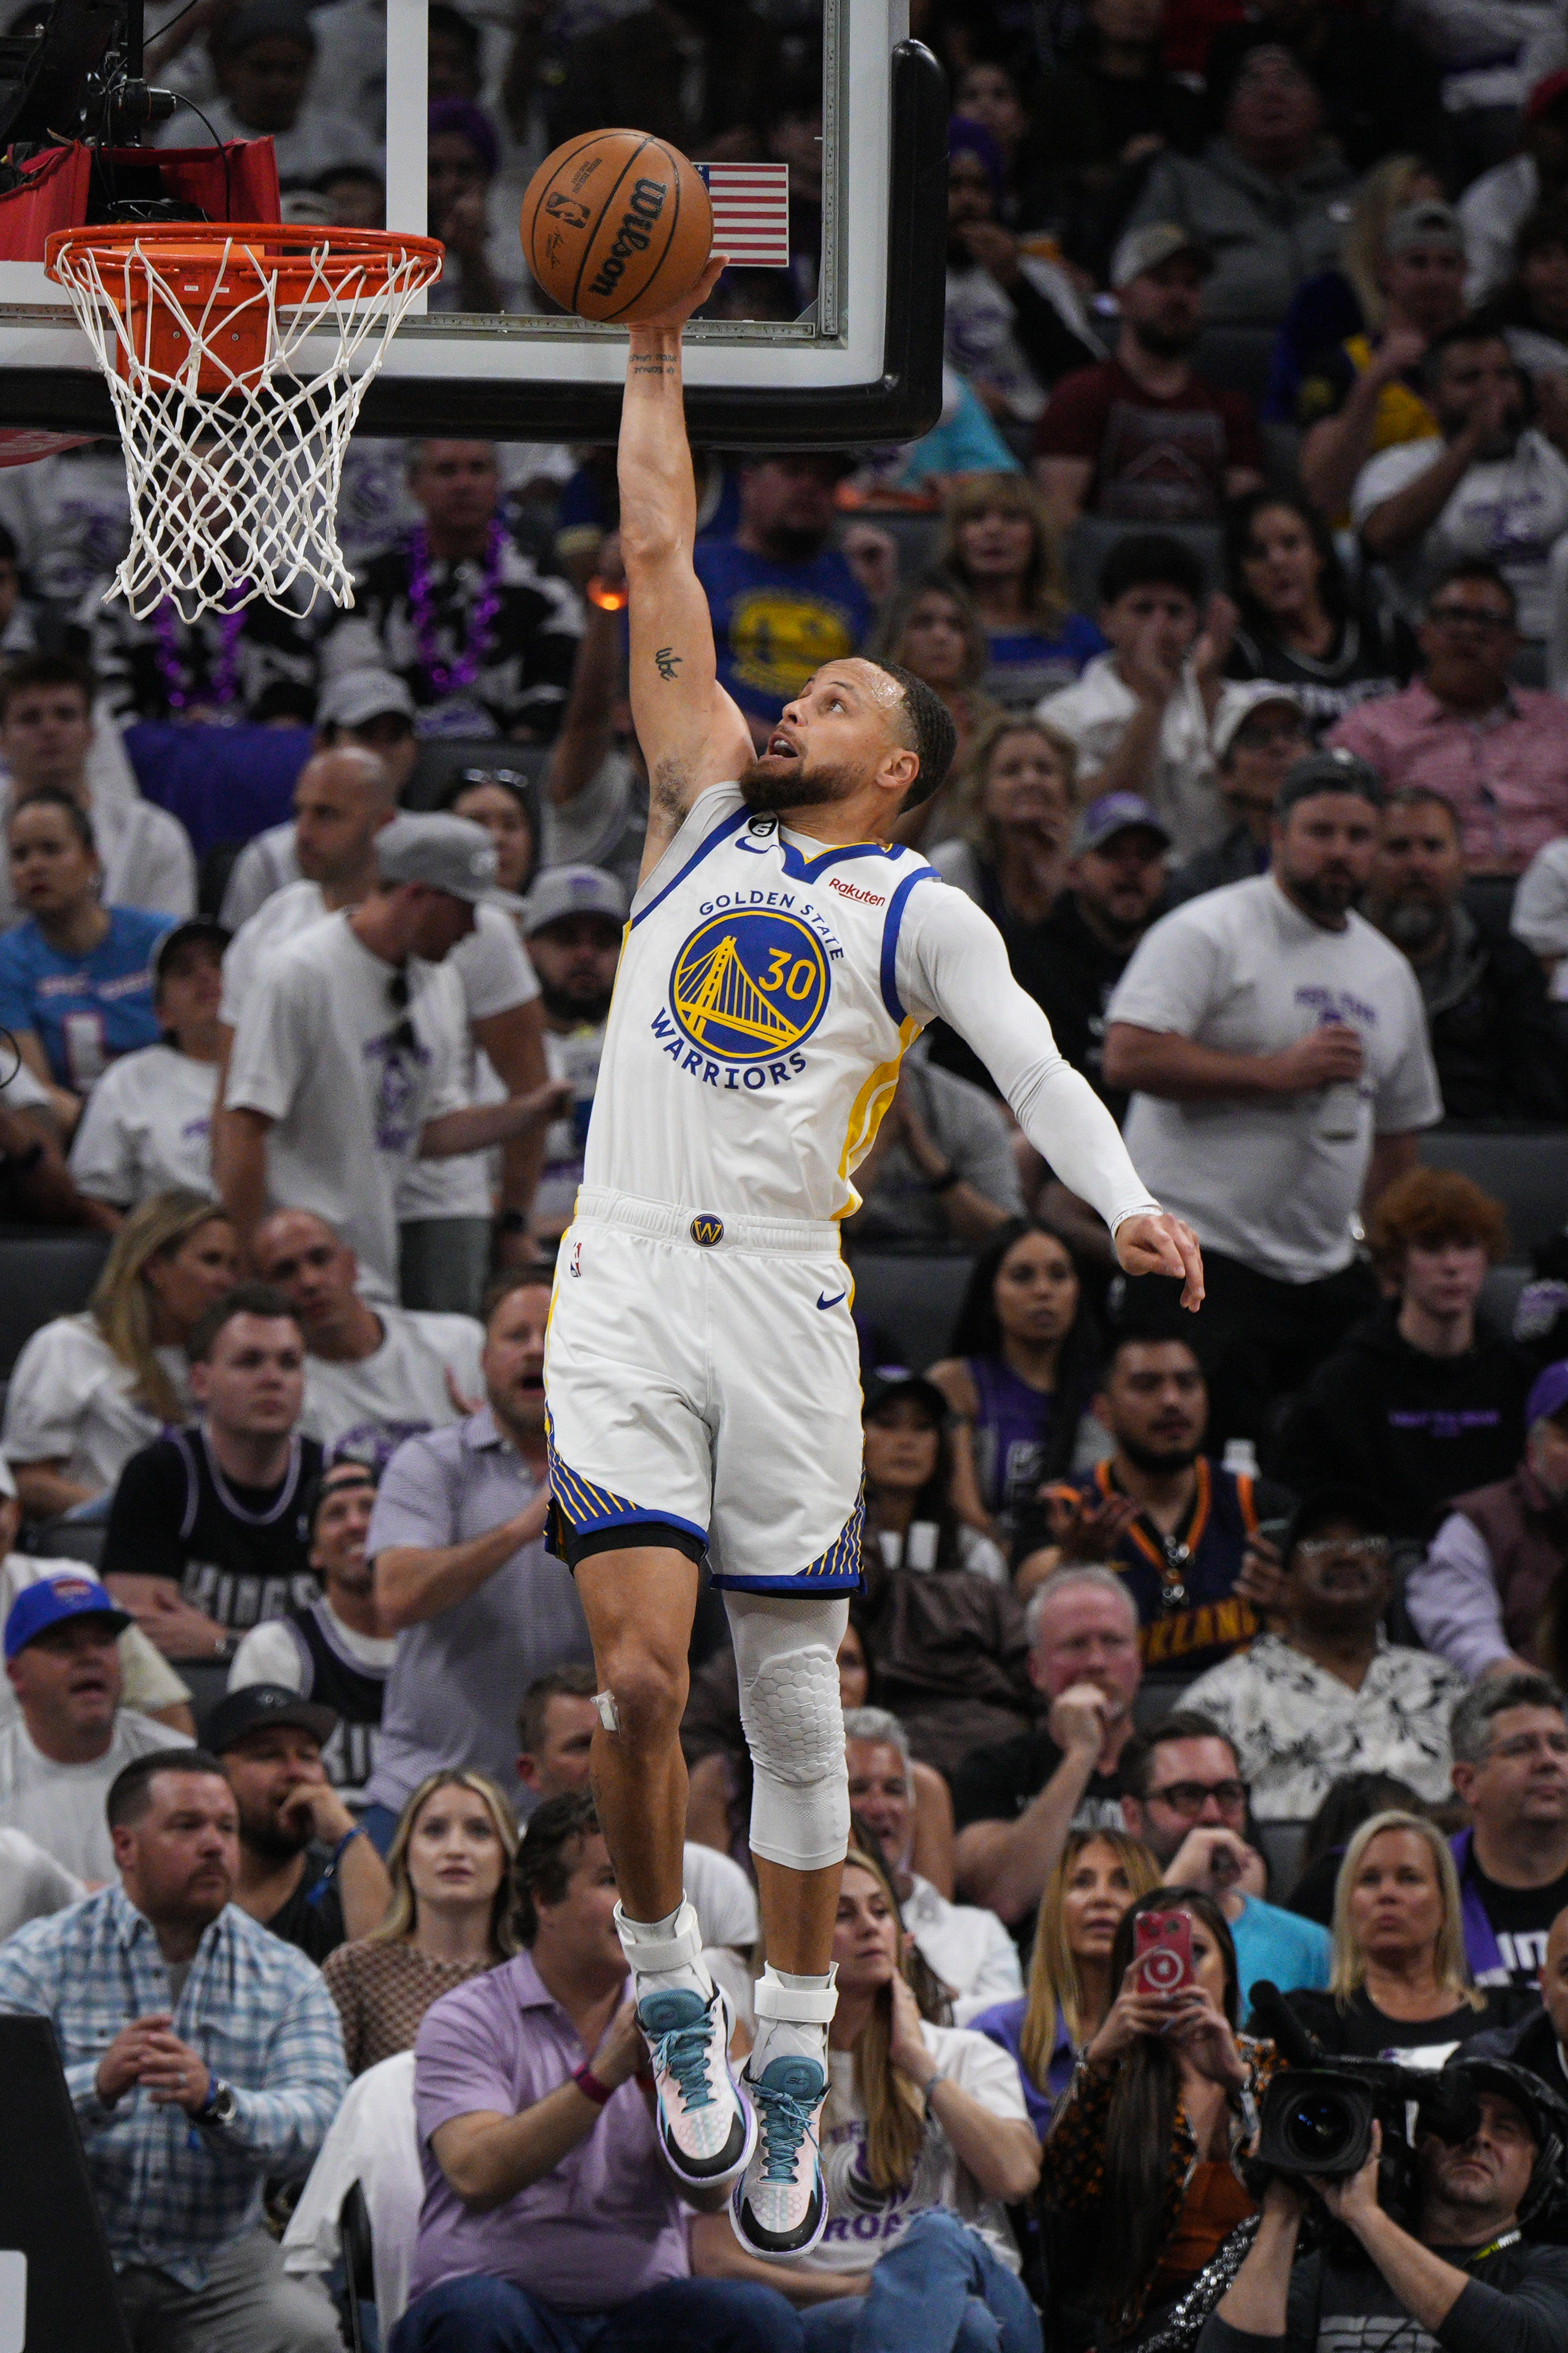 Stephen Curry airborne for a layup